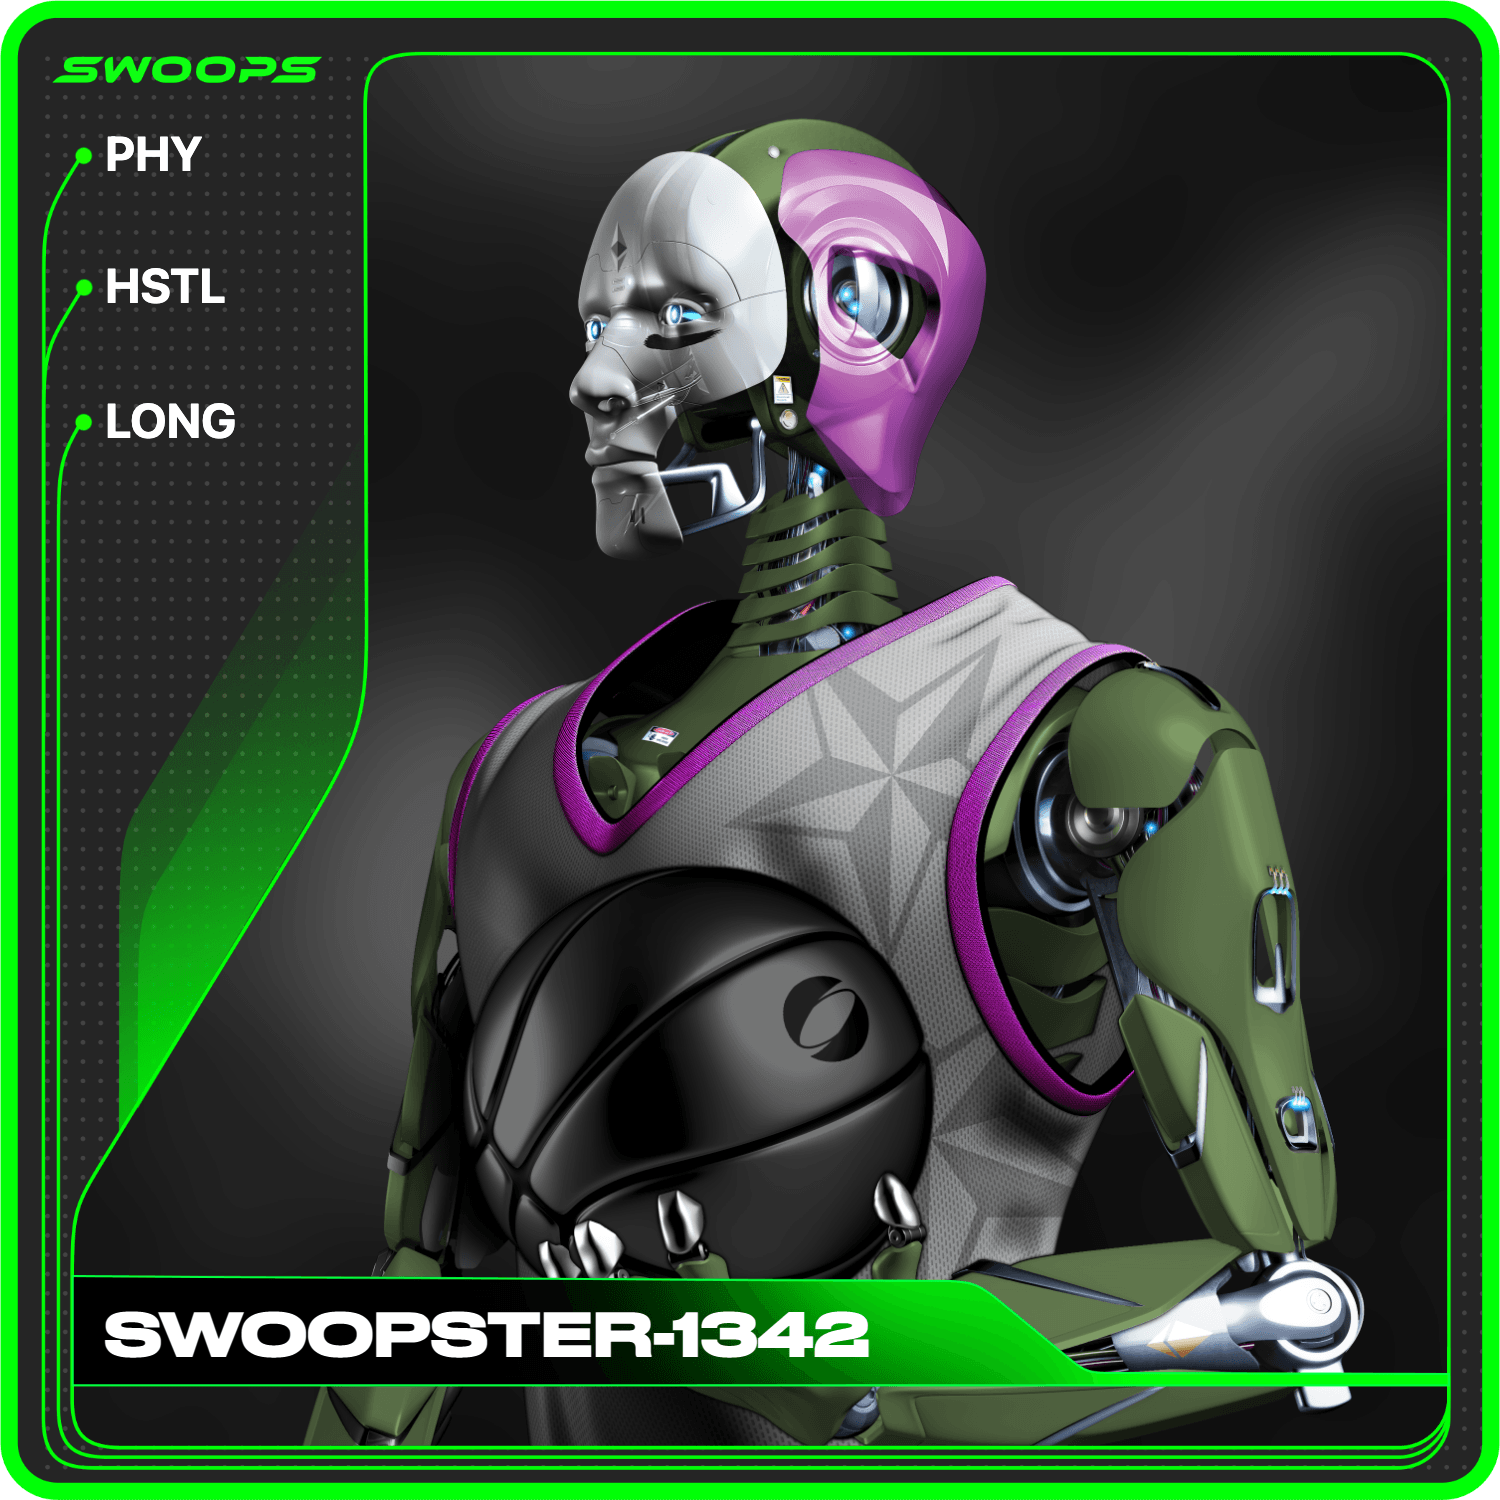 SWOOPSTER-1342